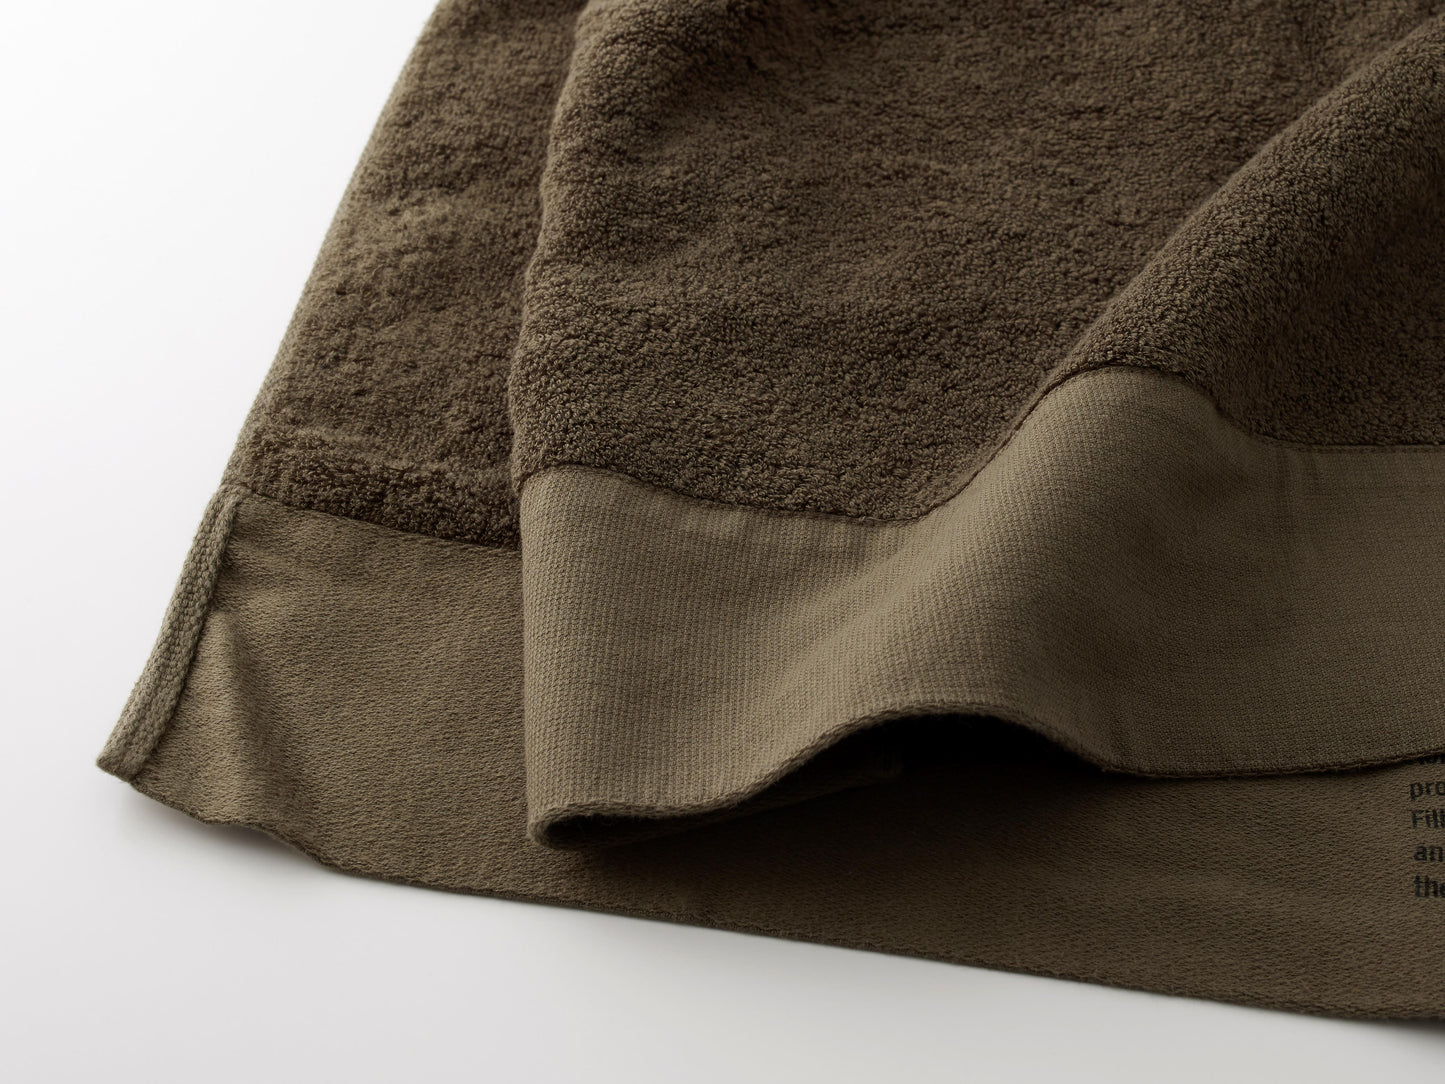 Brown Filhiba towel on a white background